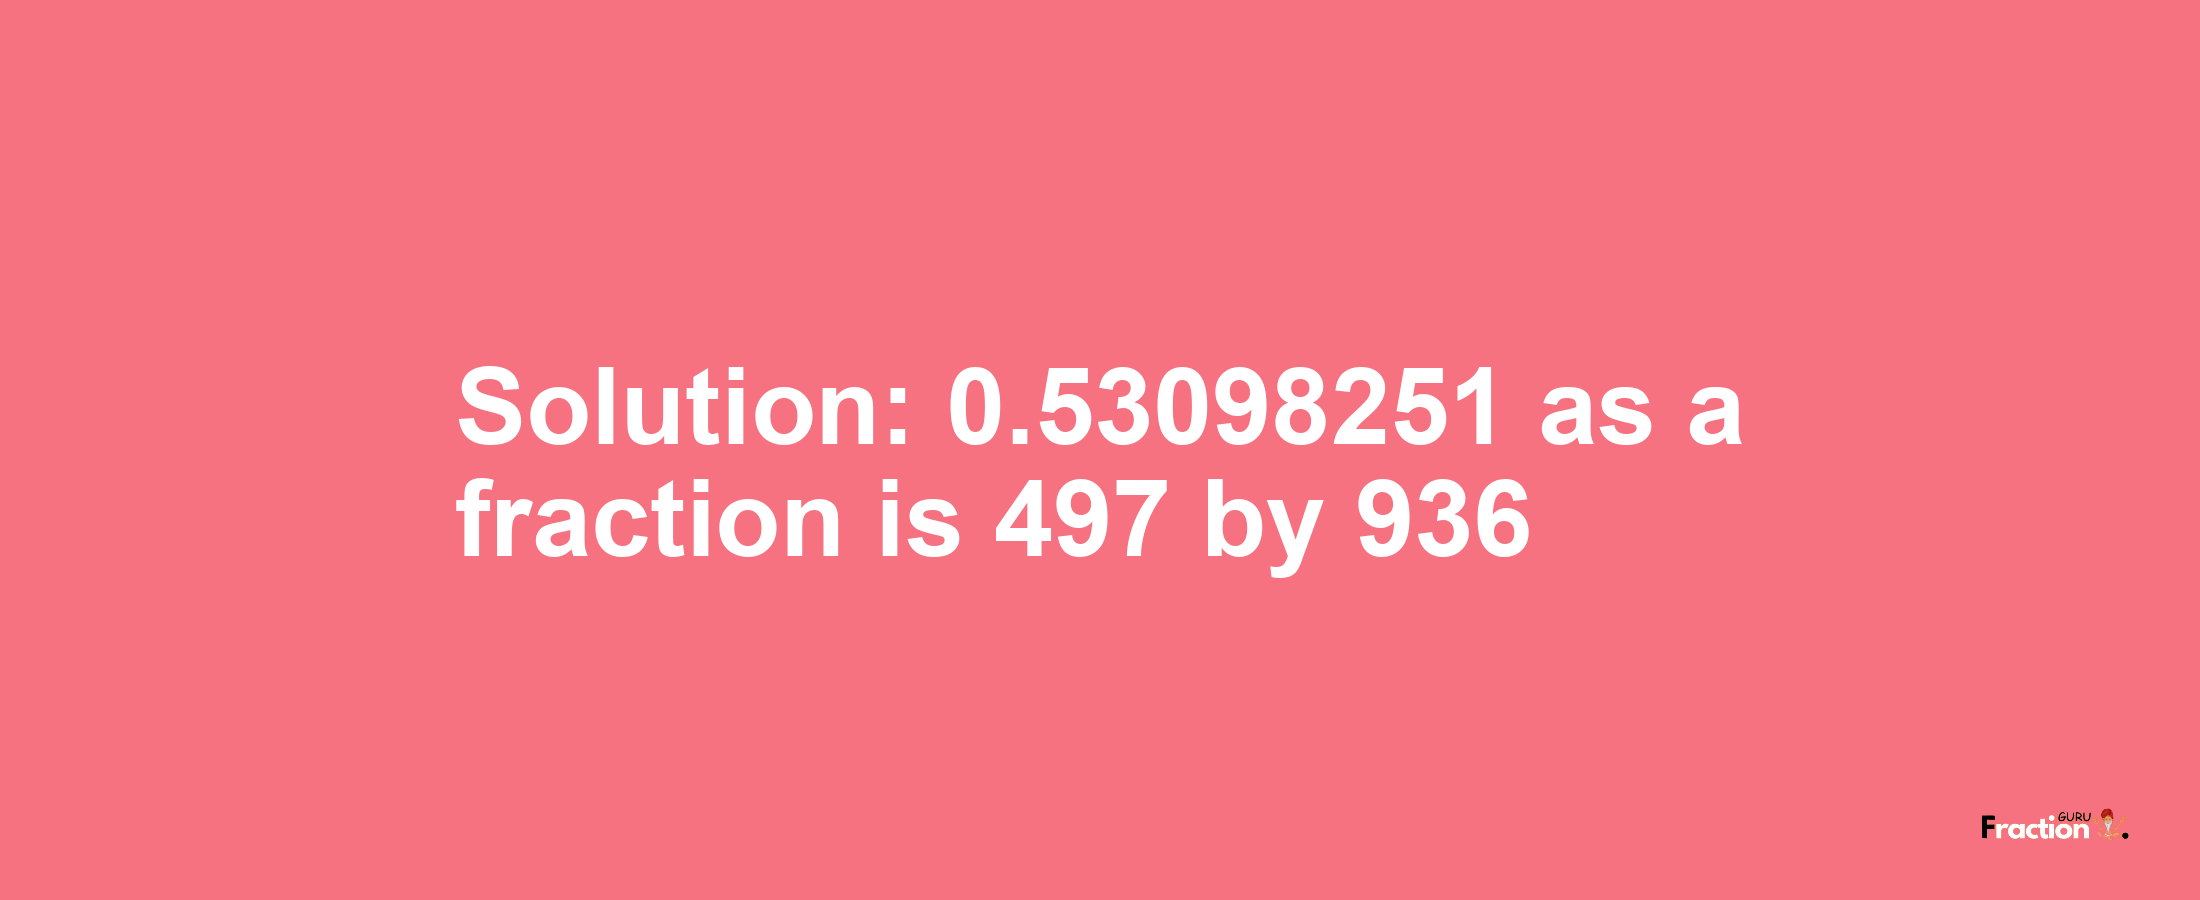 Solution:0.53098251 as a fraction is 497/936